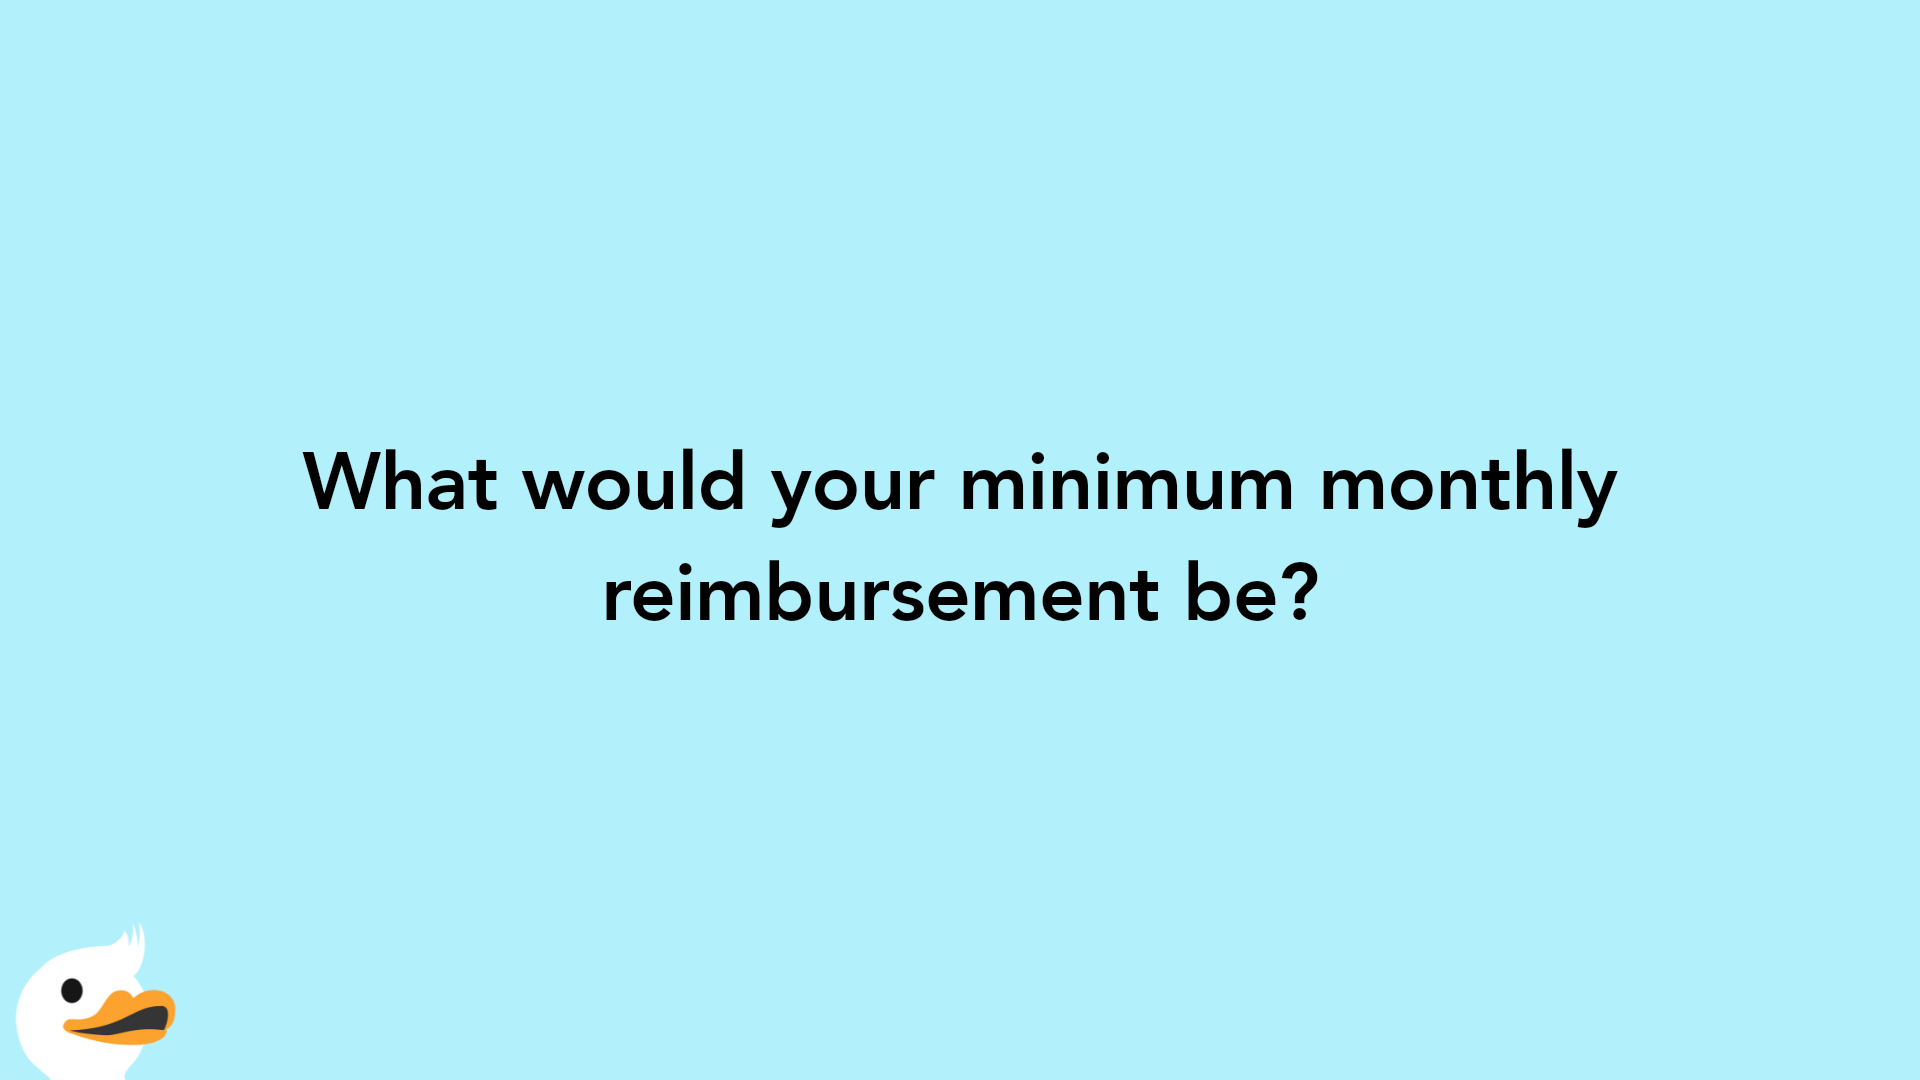 What would your minimum monthly reimbursement be?